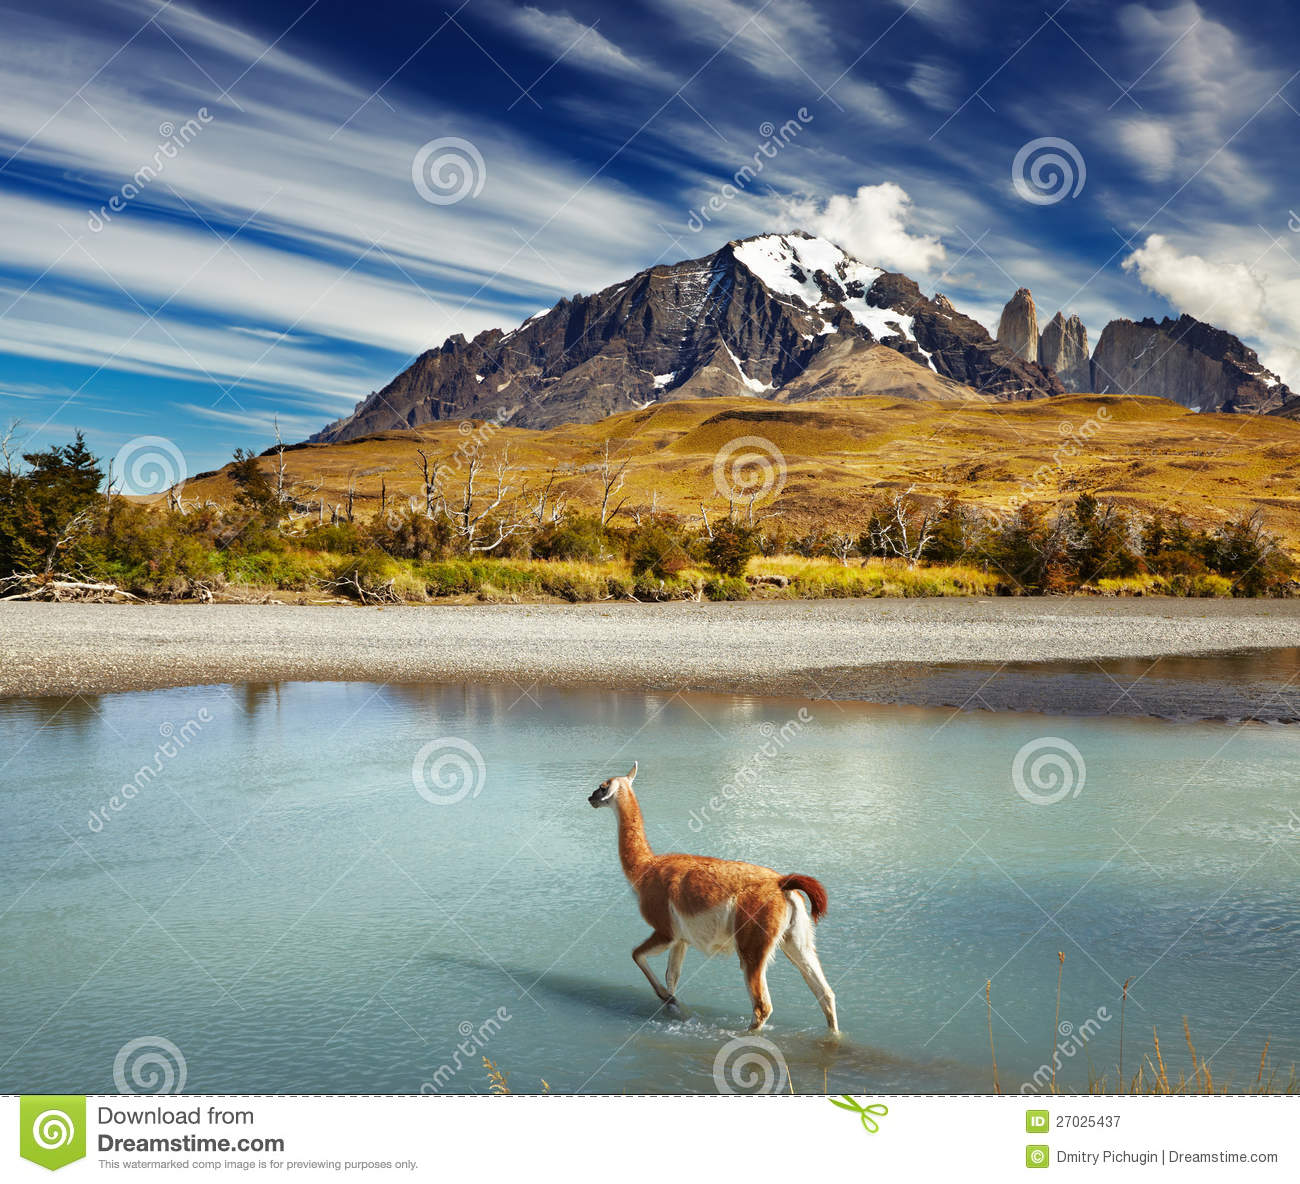 Torres Del Paine National Park clipart #18, Download drawings